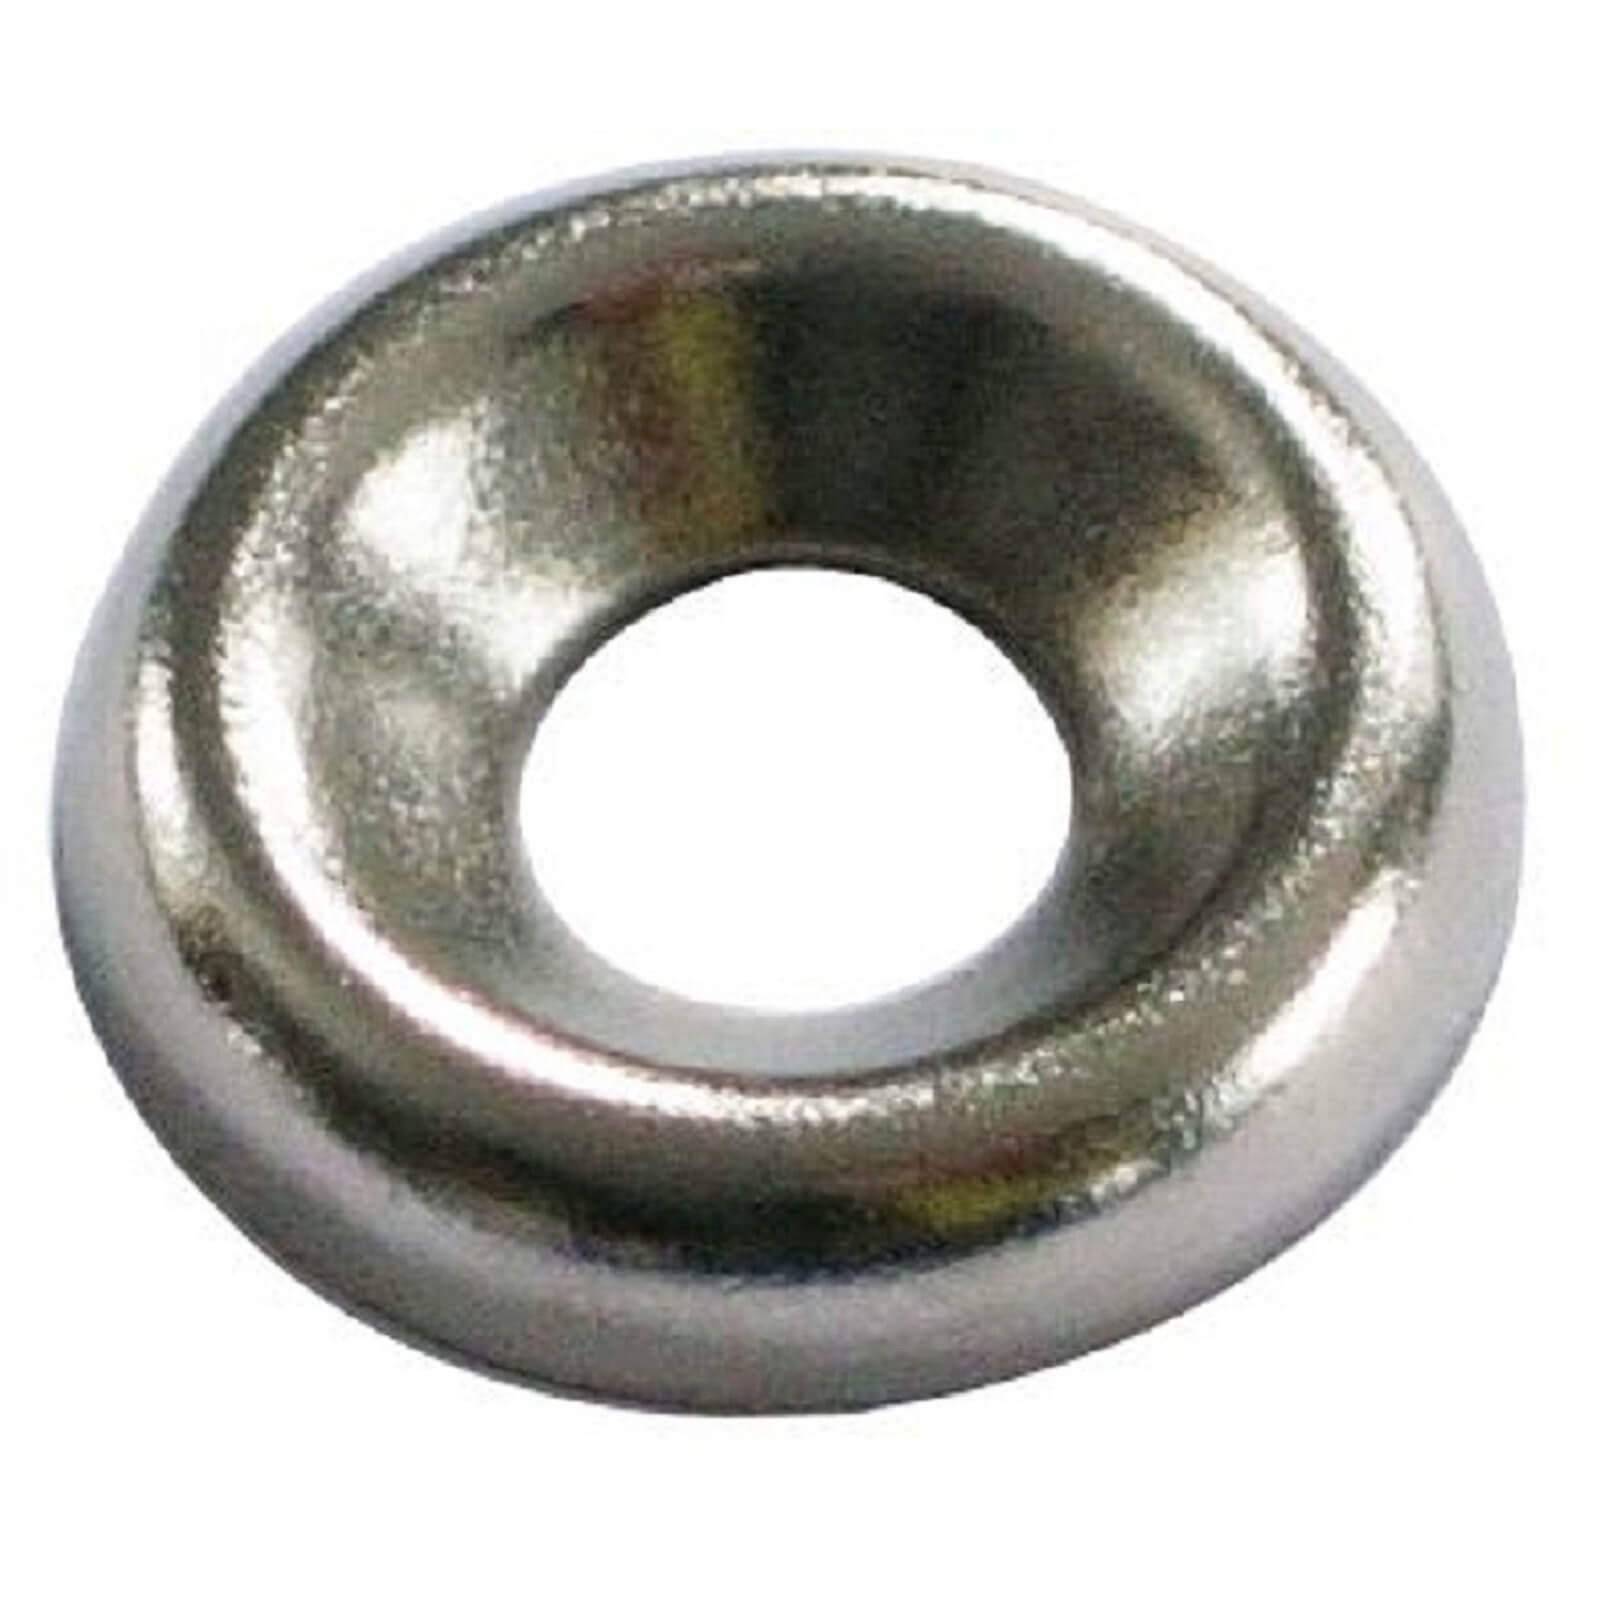 Screw Cup Washer - Nickel Plated - 6mm - 20 Pack